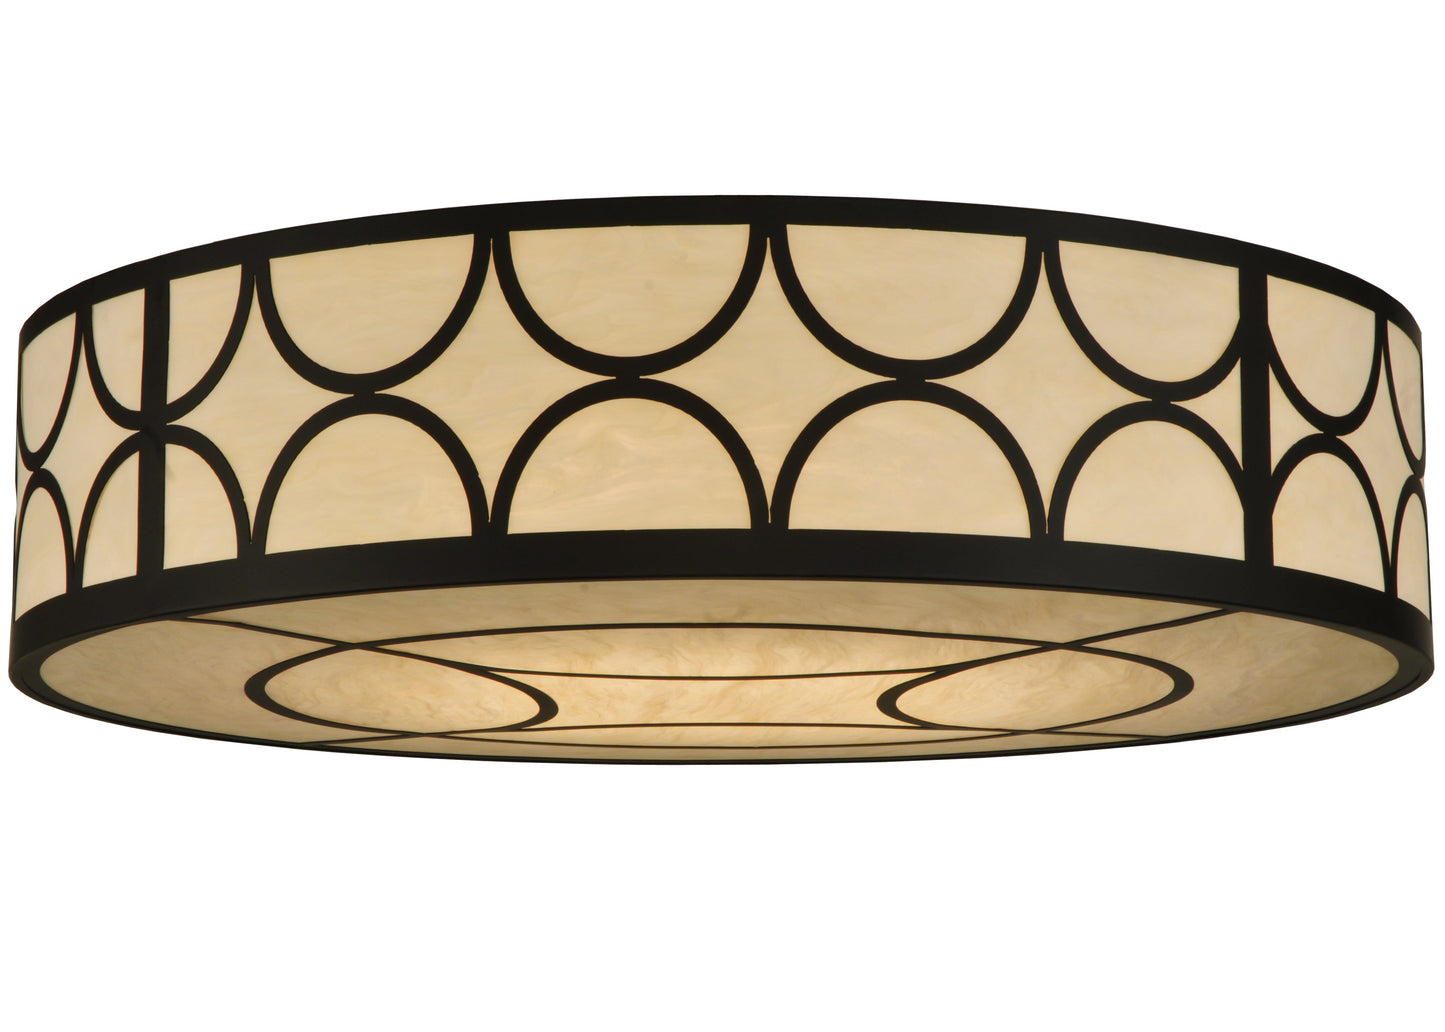 48" Revival Deco Cilindro Flushmount by 2nd Ave Lighting